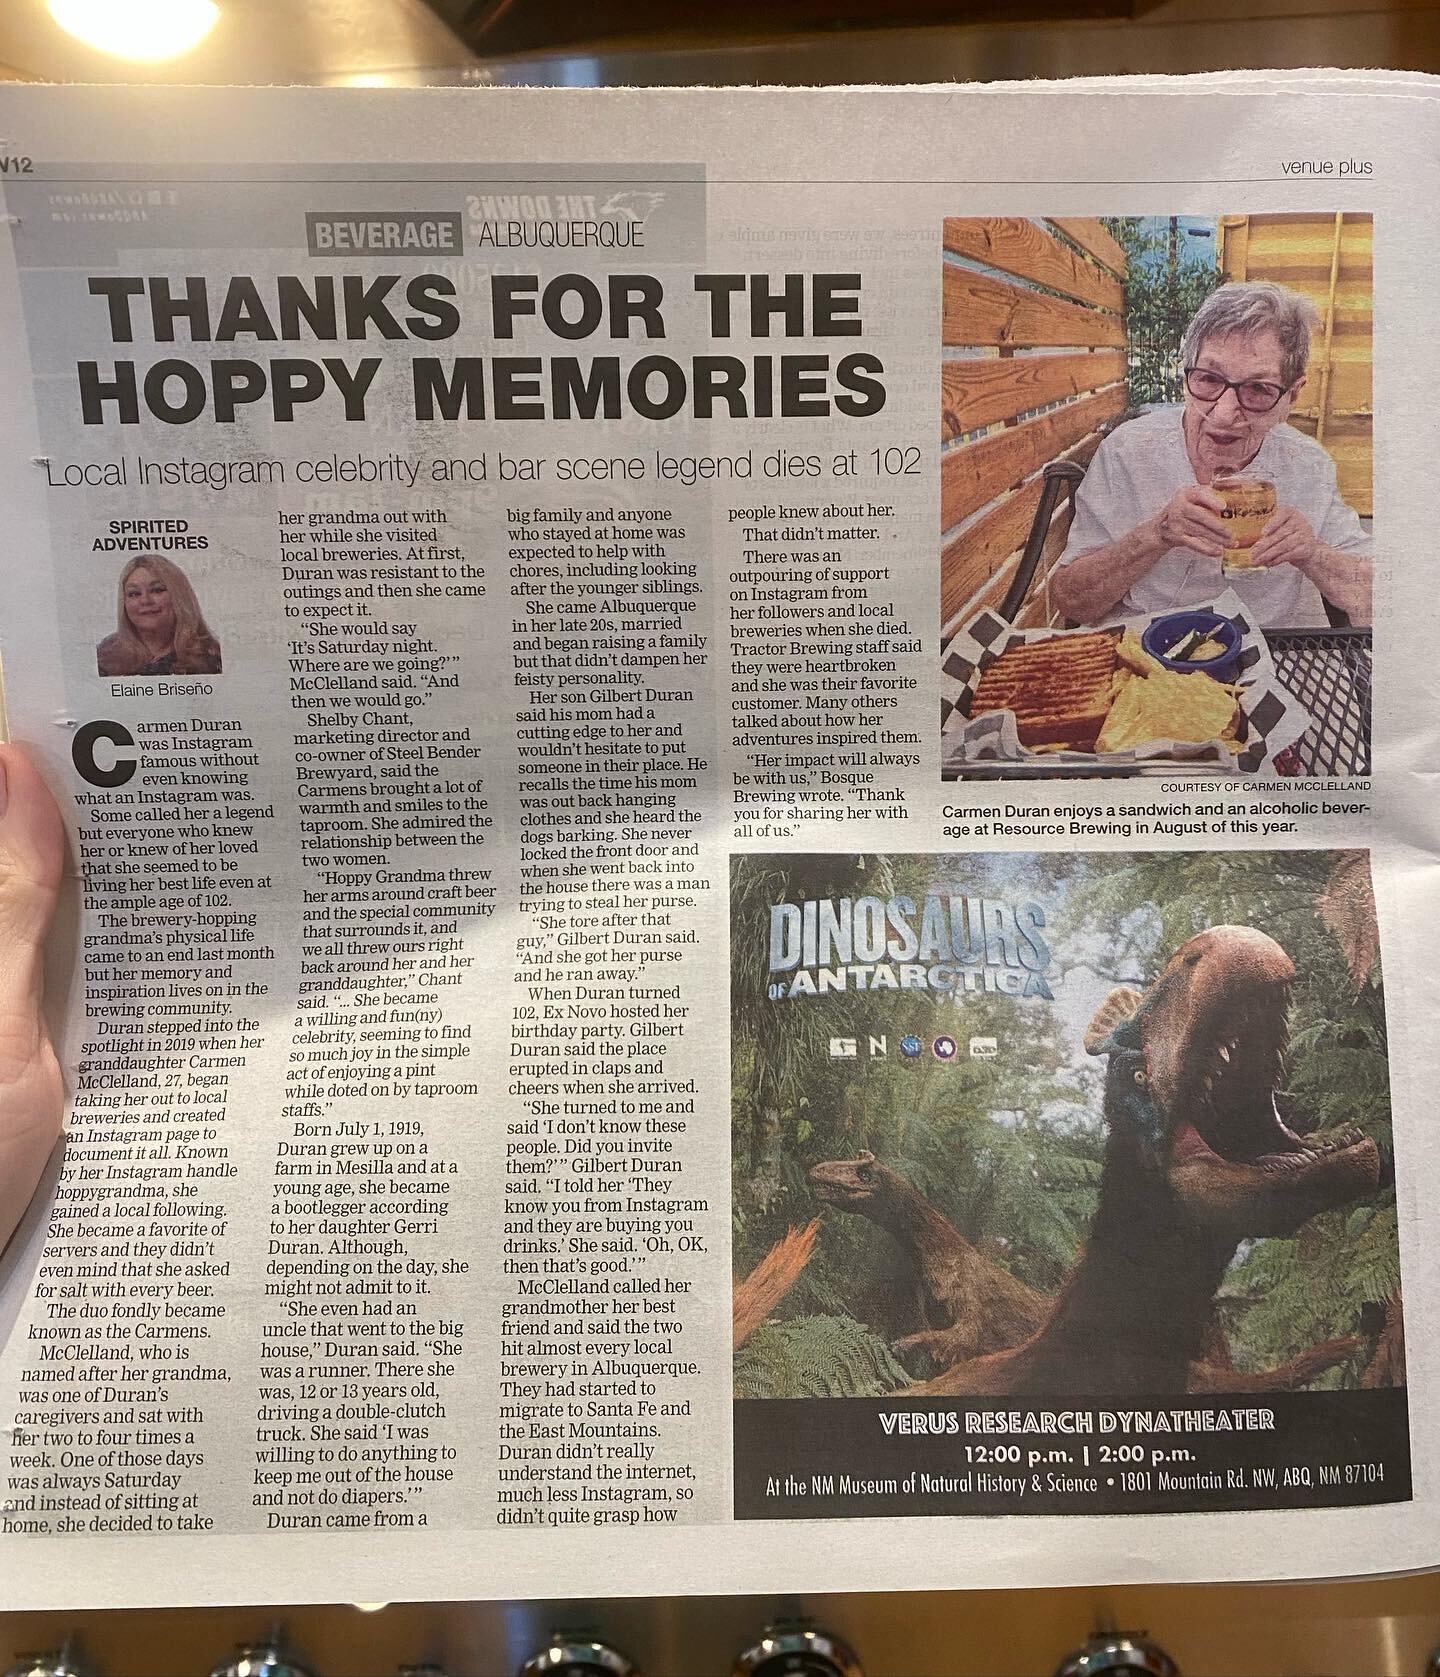 What an amazing story by @laneythegirl in the Albuquerque Journal this morning. She did an amazing job telling her story. Grandma is an amazing person, and I&rsquo;m so proud of her. Grandma is officially in print!!!! Seriously amazing and tearjerk q